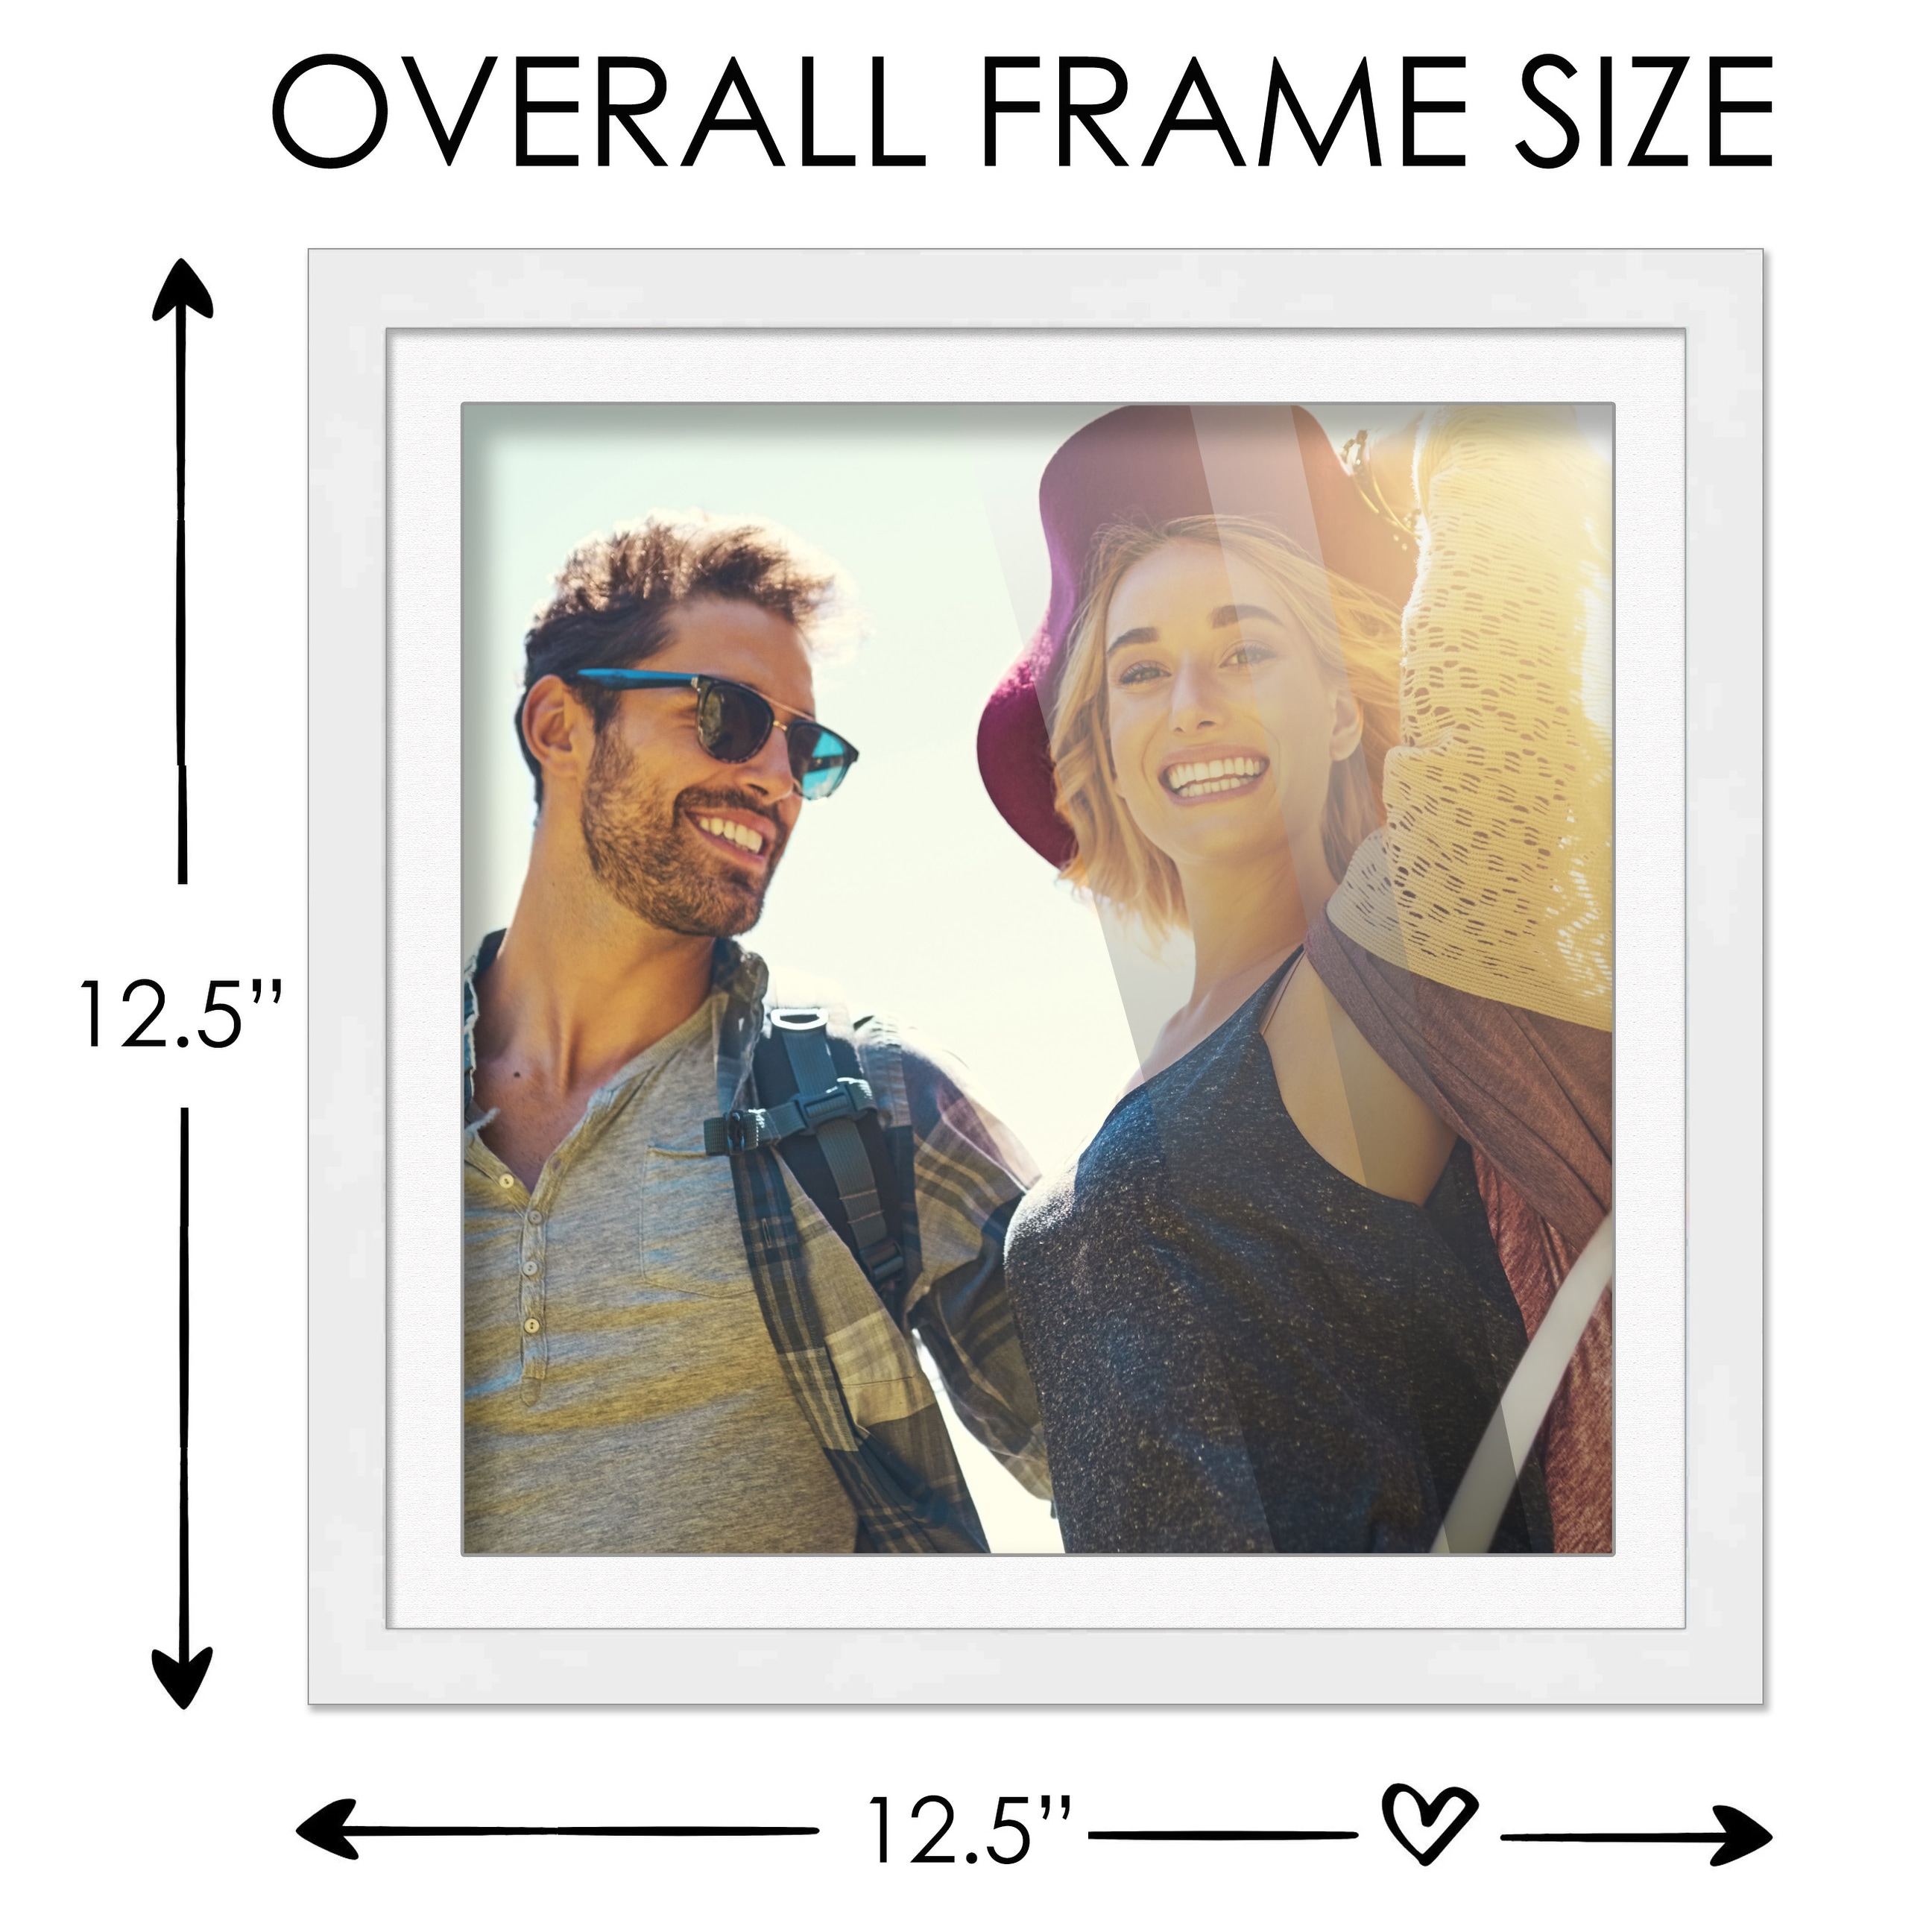 4x4 Frame with Mat - Brown 8x8 Frame Wood Made to Display Print or